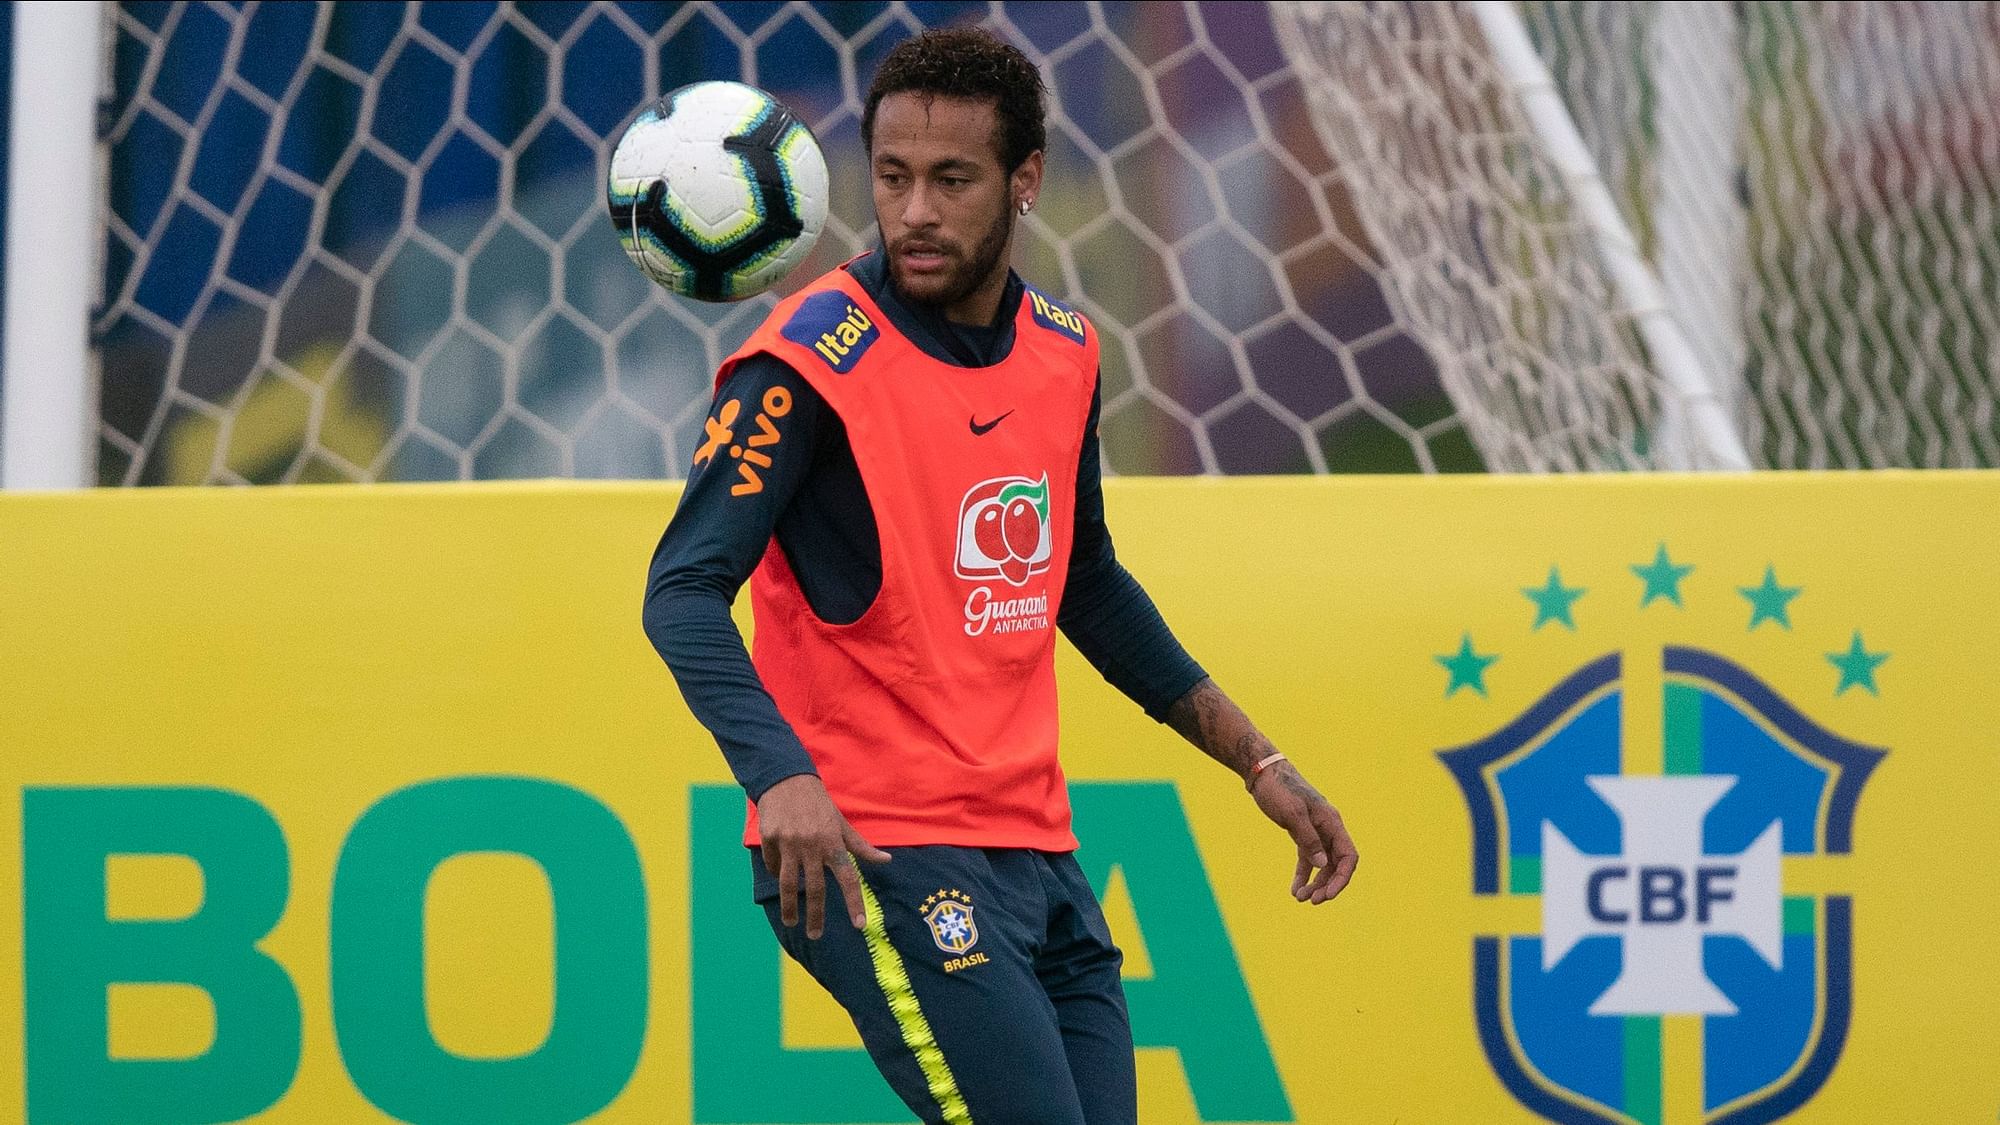 Neymar published a seven-minute Instagram video in which he denied any wrongdoing.